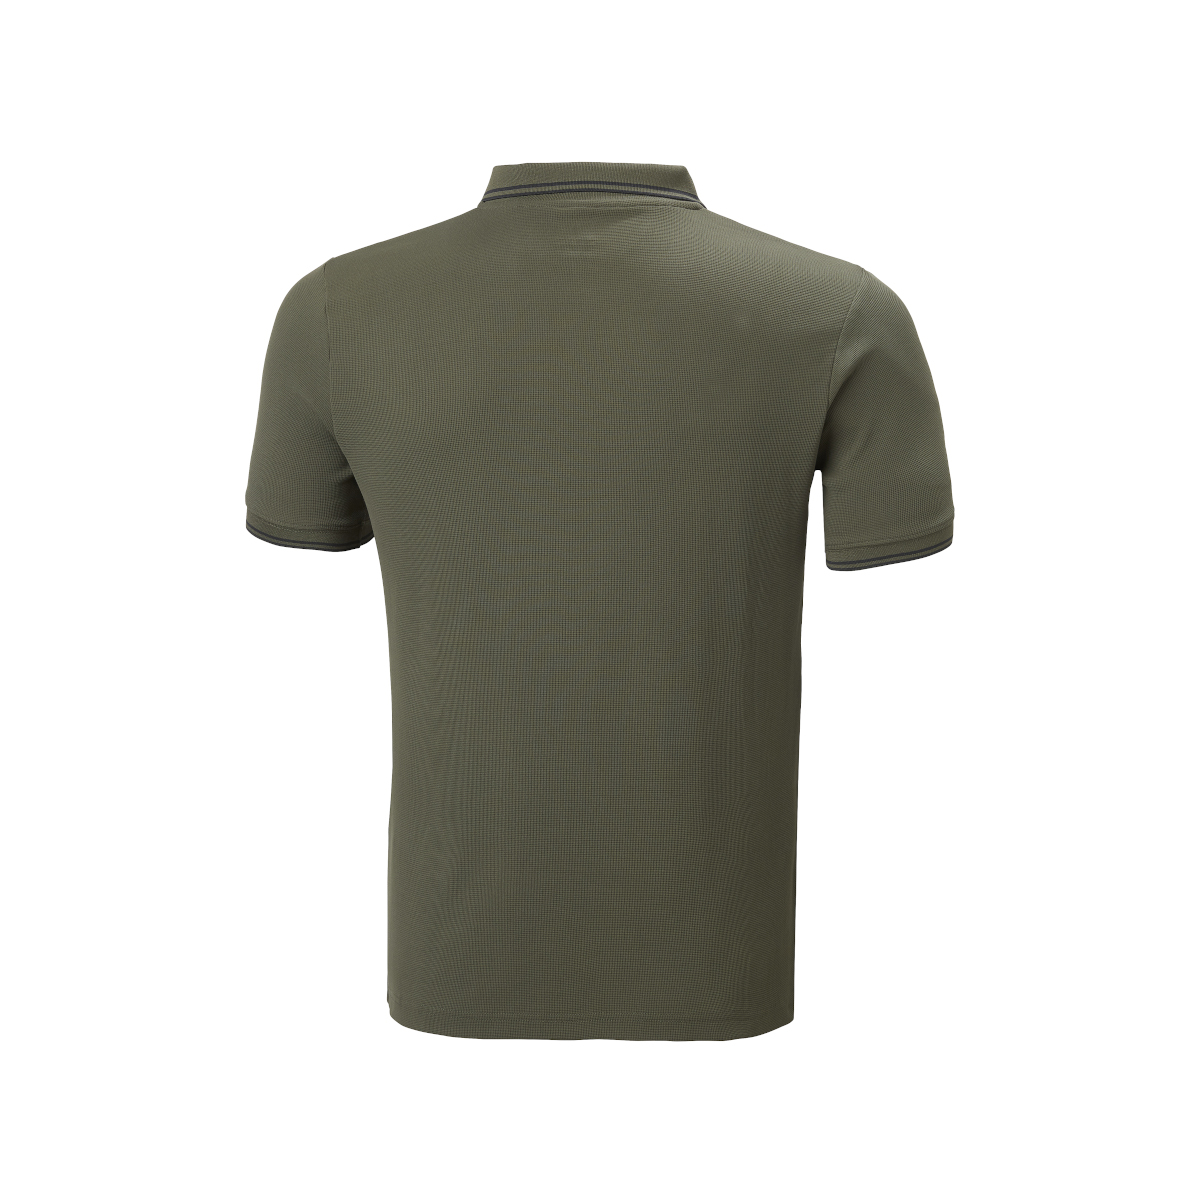 Helly Hansen KOS polo homme olive, taille M